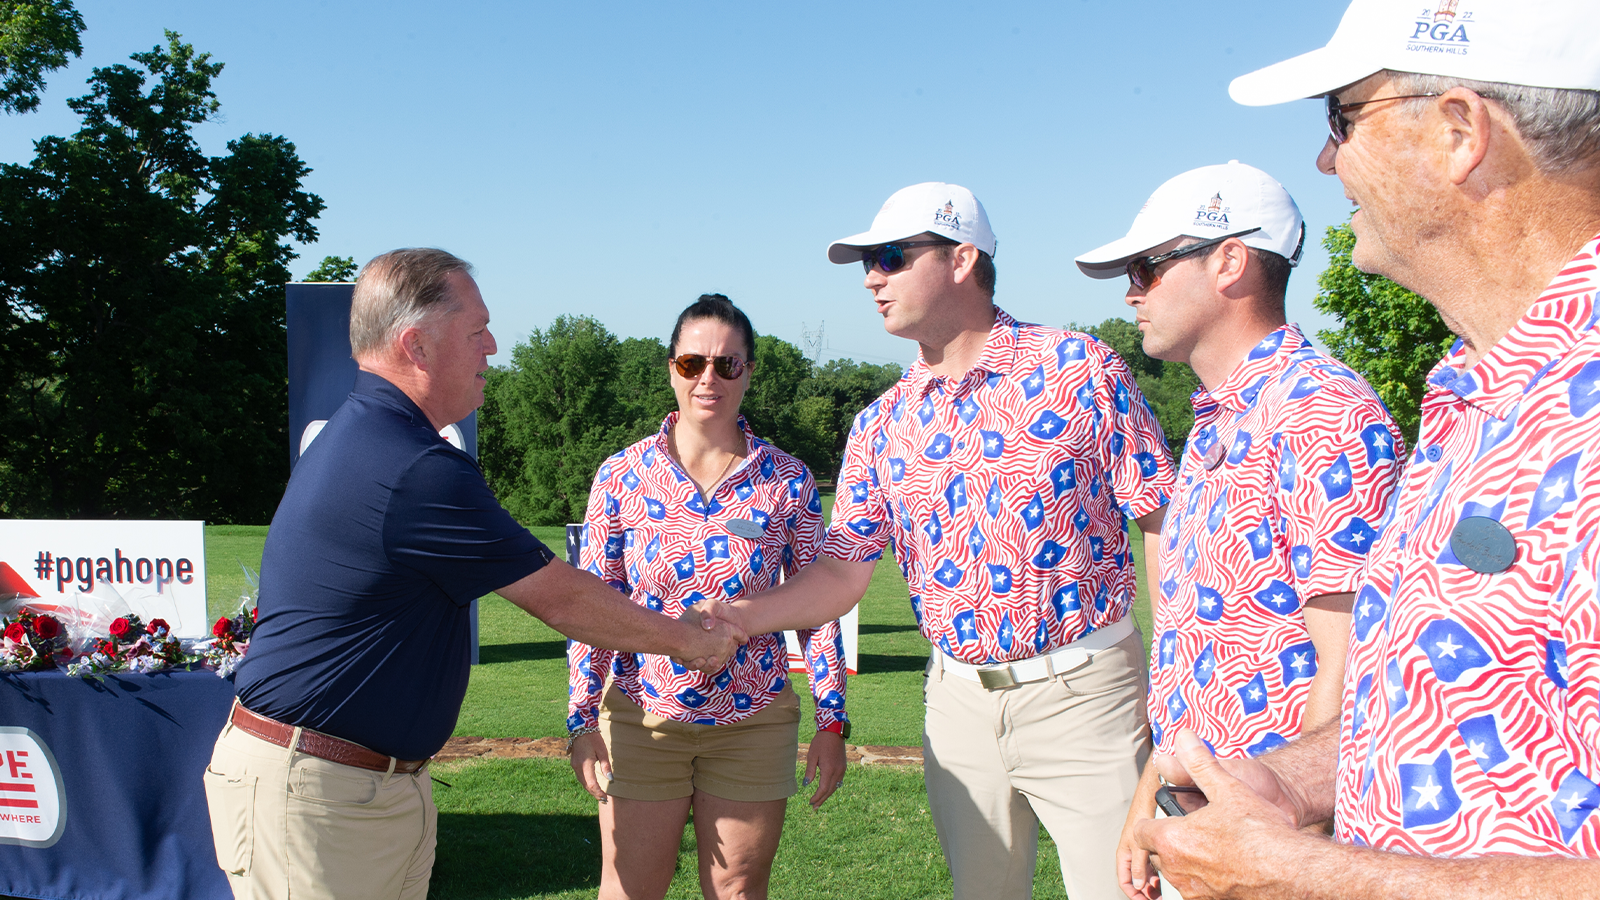 PGA of America President, Jim Richerson and the Club at Indian Springs PGA Professionals during the PGA Reach Secretary's Cup of the 2022 PGA Championship held at the Club at Indian Springs on May 16, 2022 in Broken Arrow, Oklahoma.  (Photo by Montana Pritchard/PGA of America)